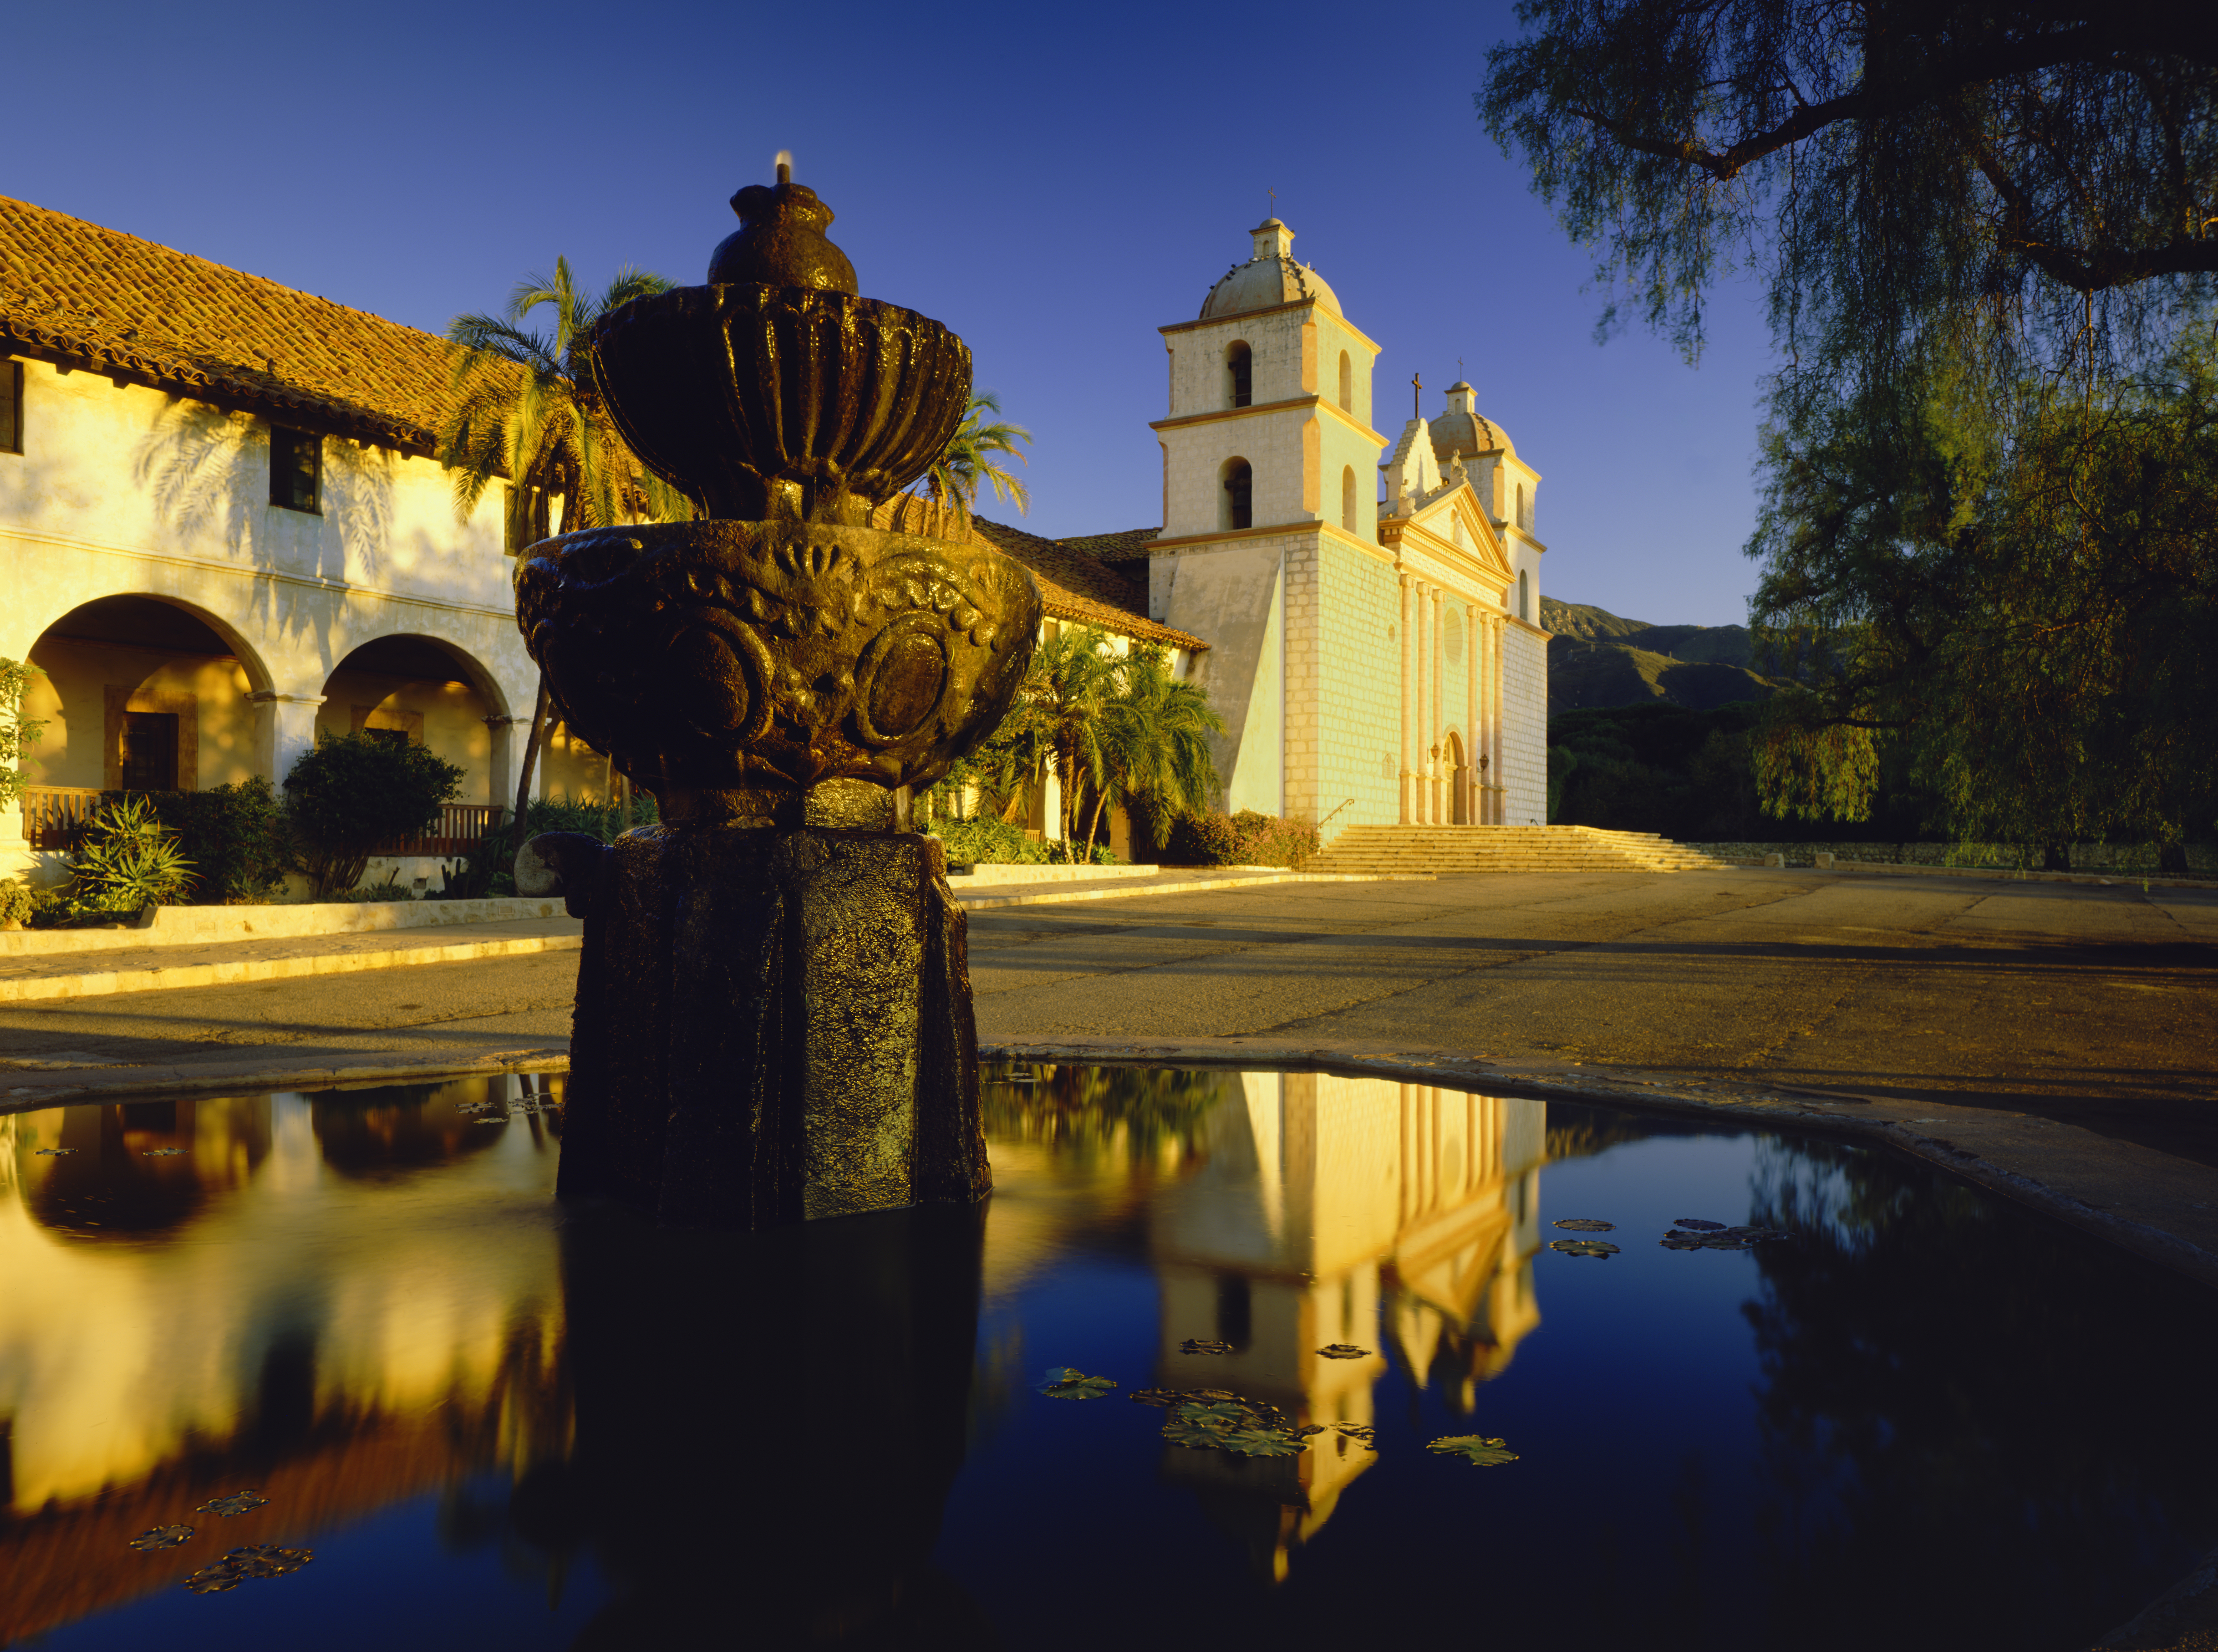 Historical mission building with a fountain in the foreground, reflecting on water